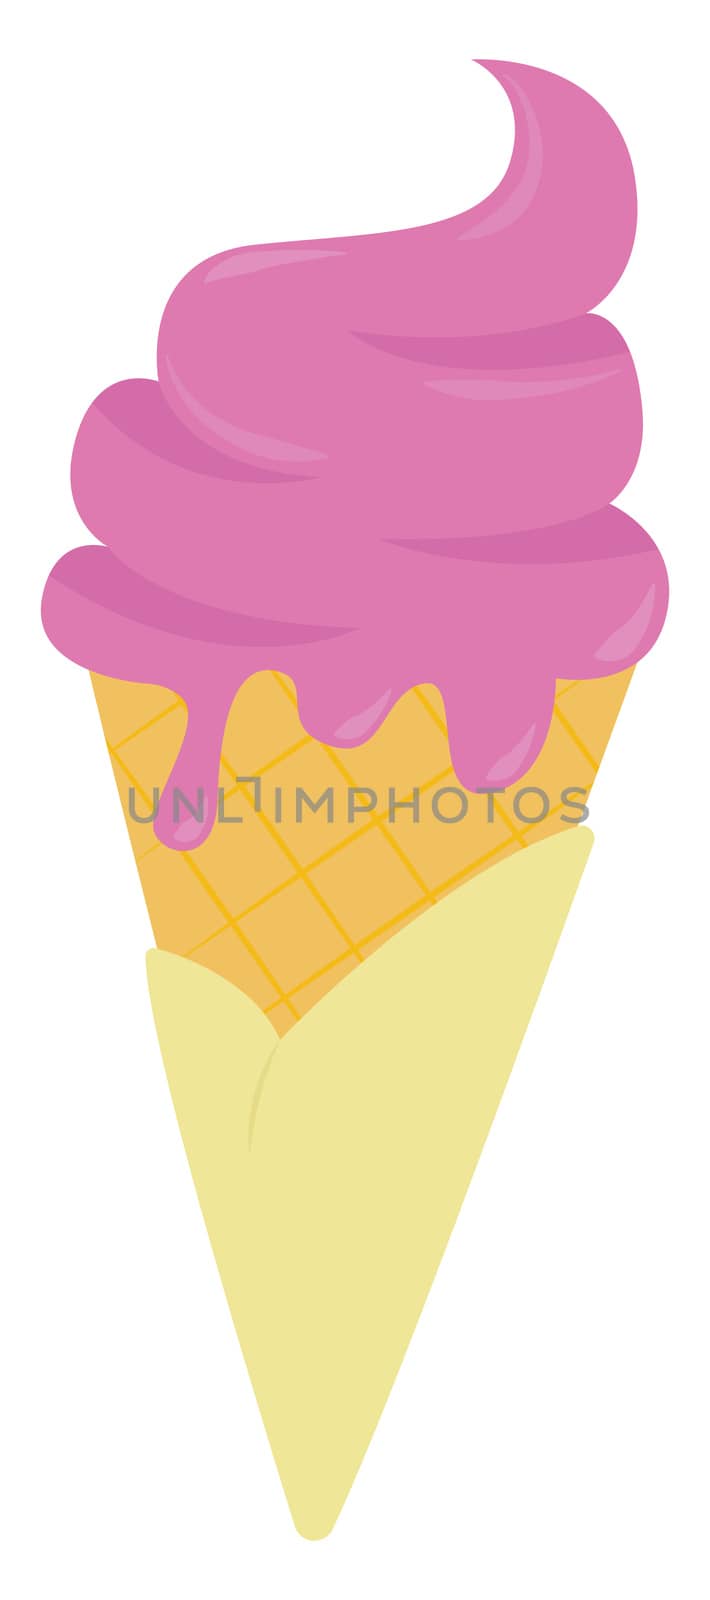 Pink ice cream in cone , illustration, vector on white background